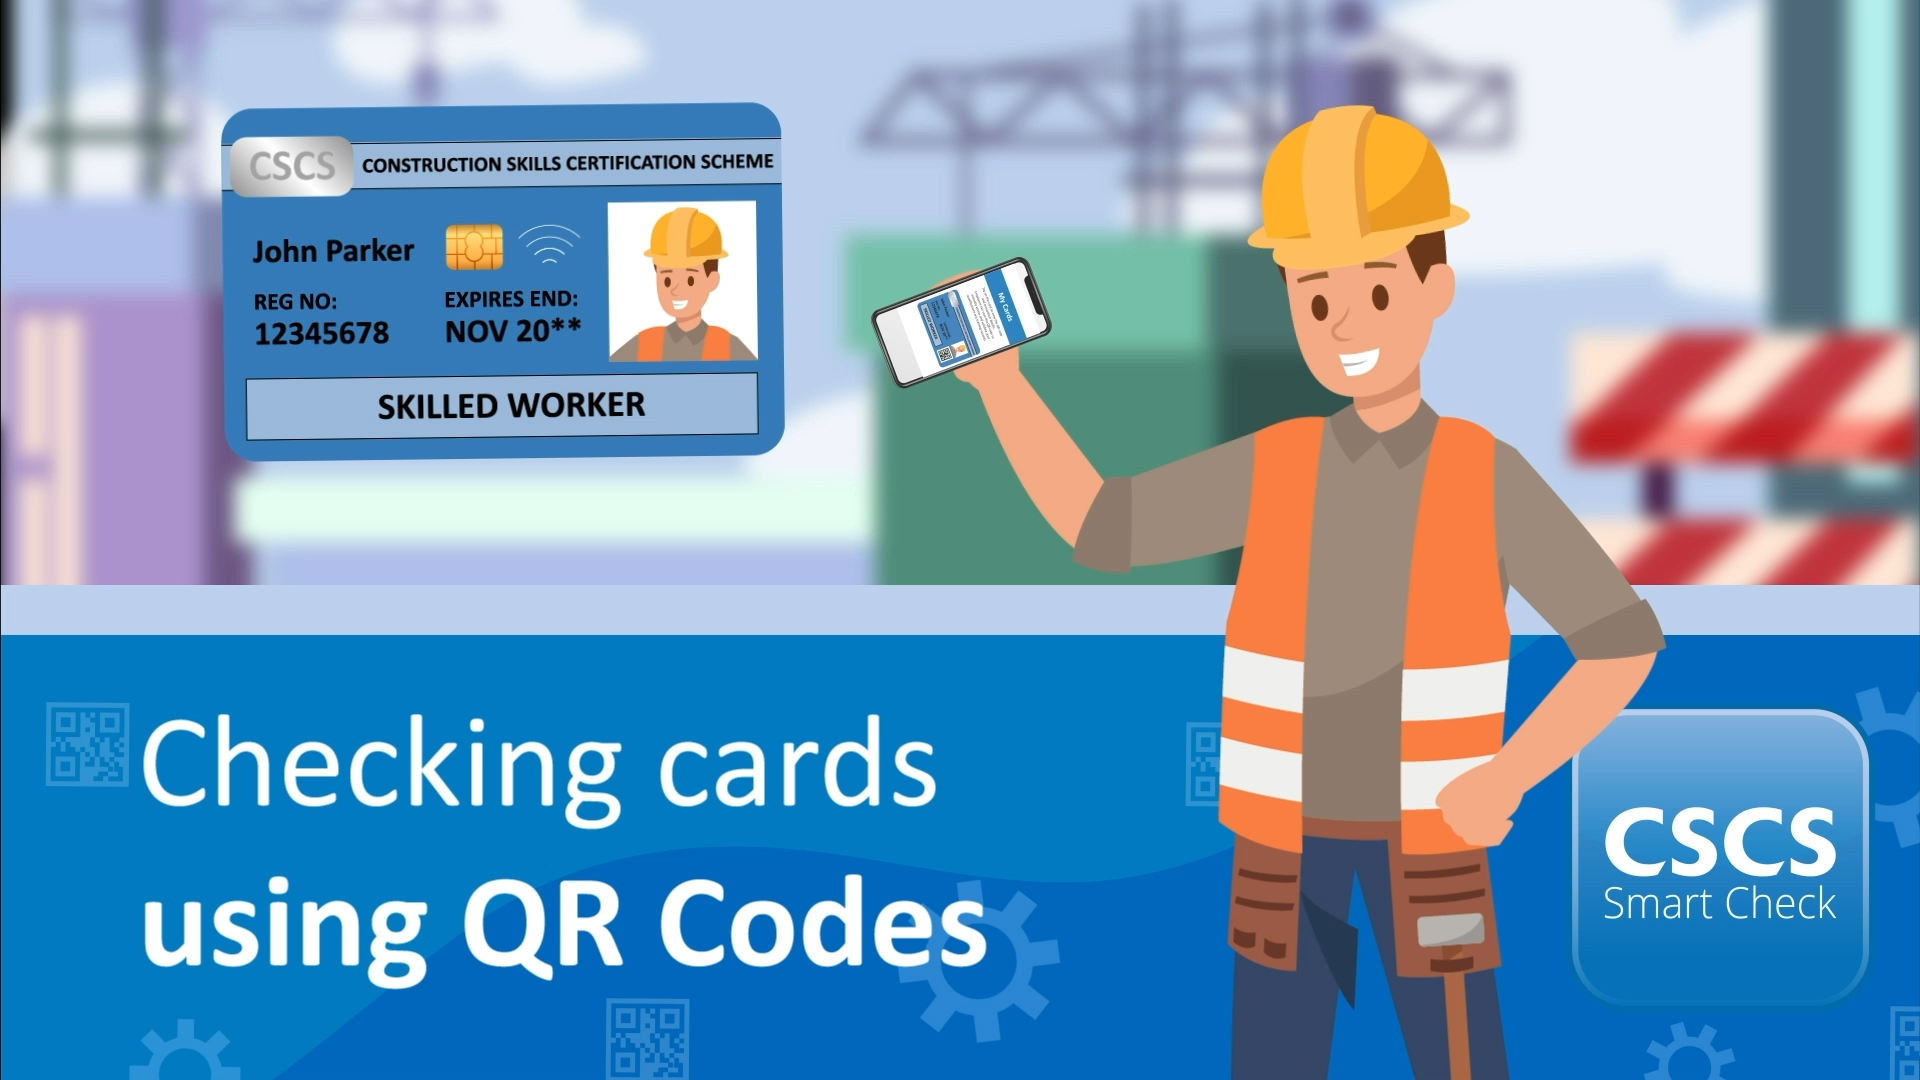 CSCS Smart Check | How to use check a card using a QR code